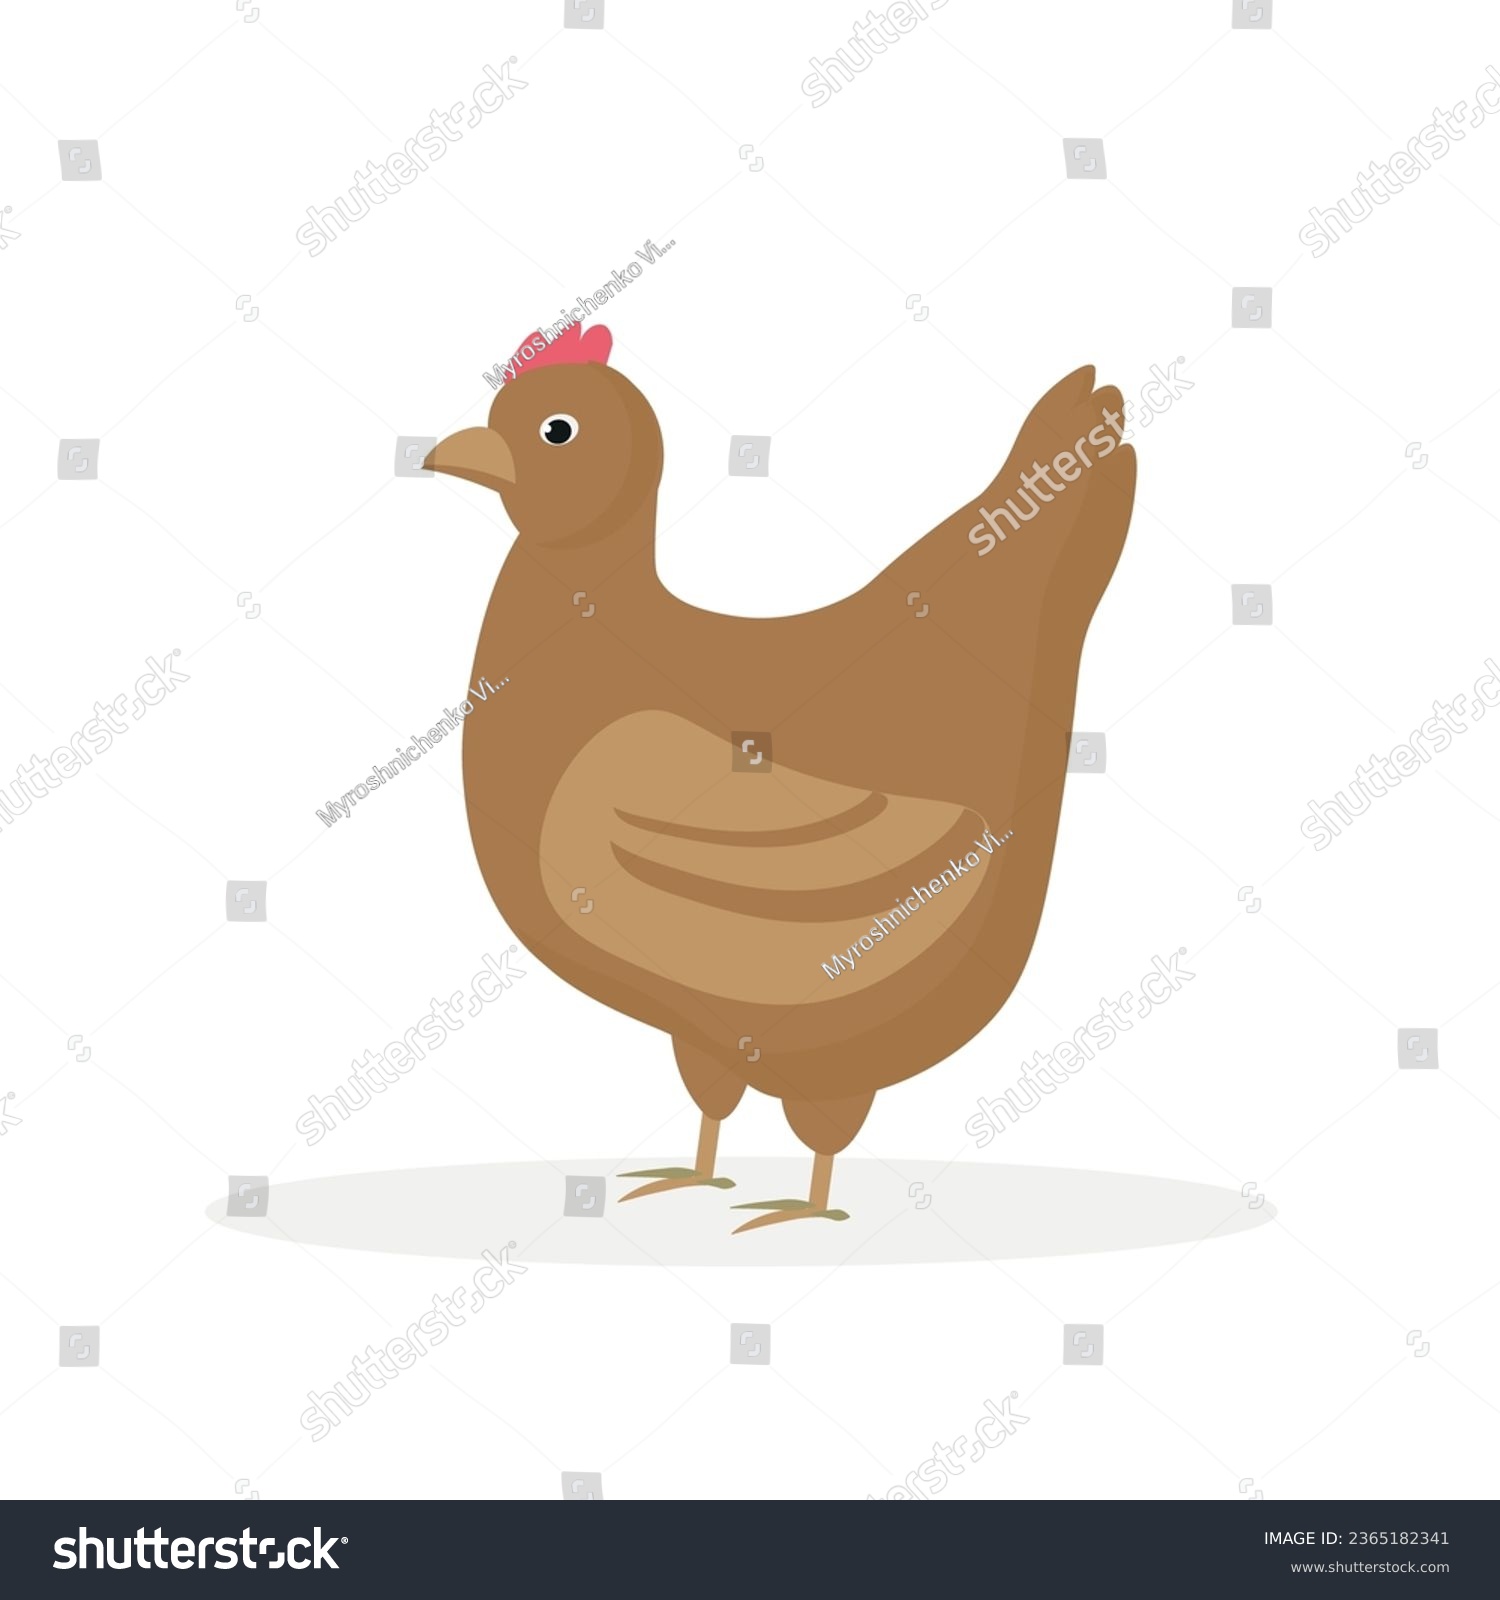 SVG of Vector hen. Flat illustration. Suitable for animation, using in web, apps, books, education projects. No transparency, solid colors only. Svg, lottie without bags. svg